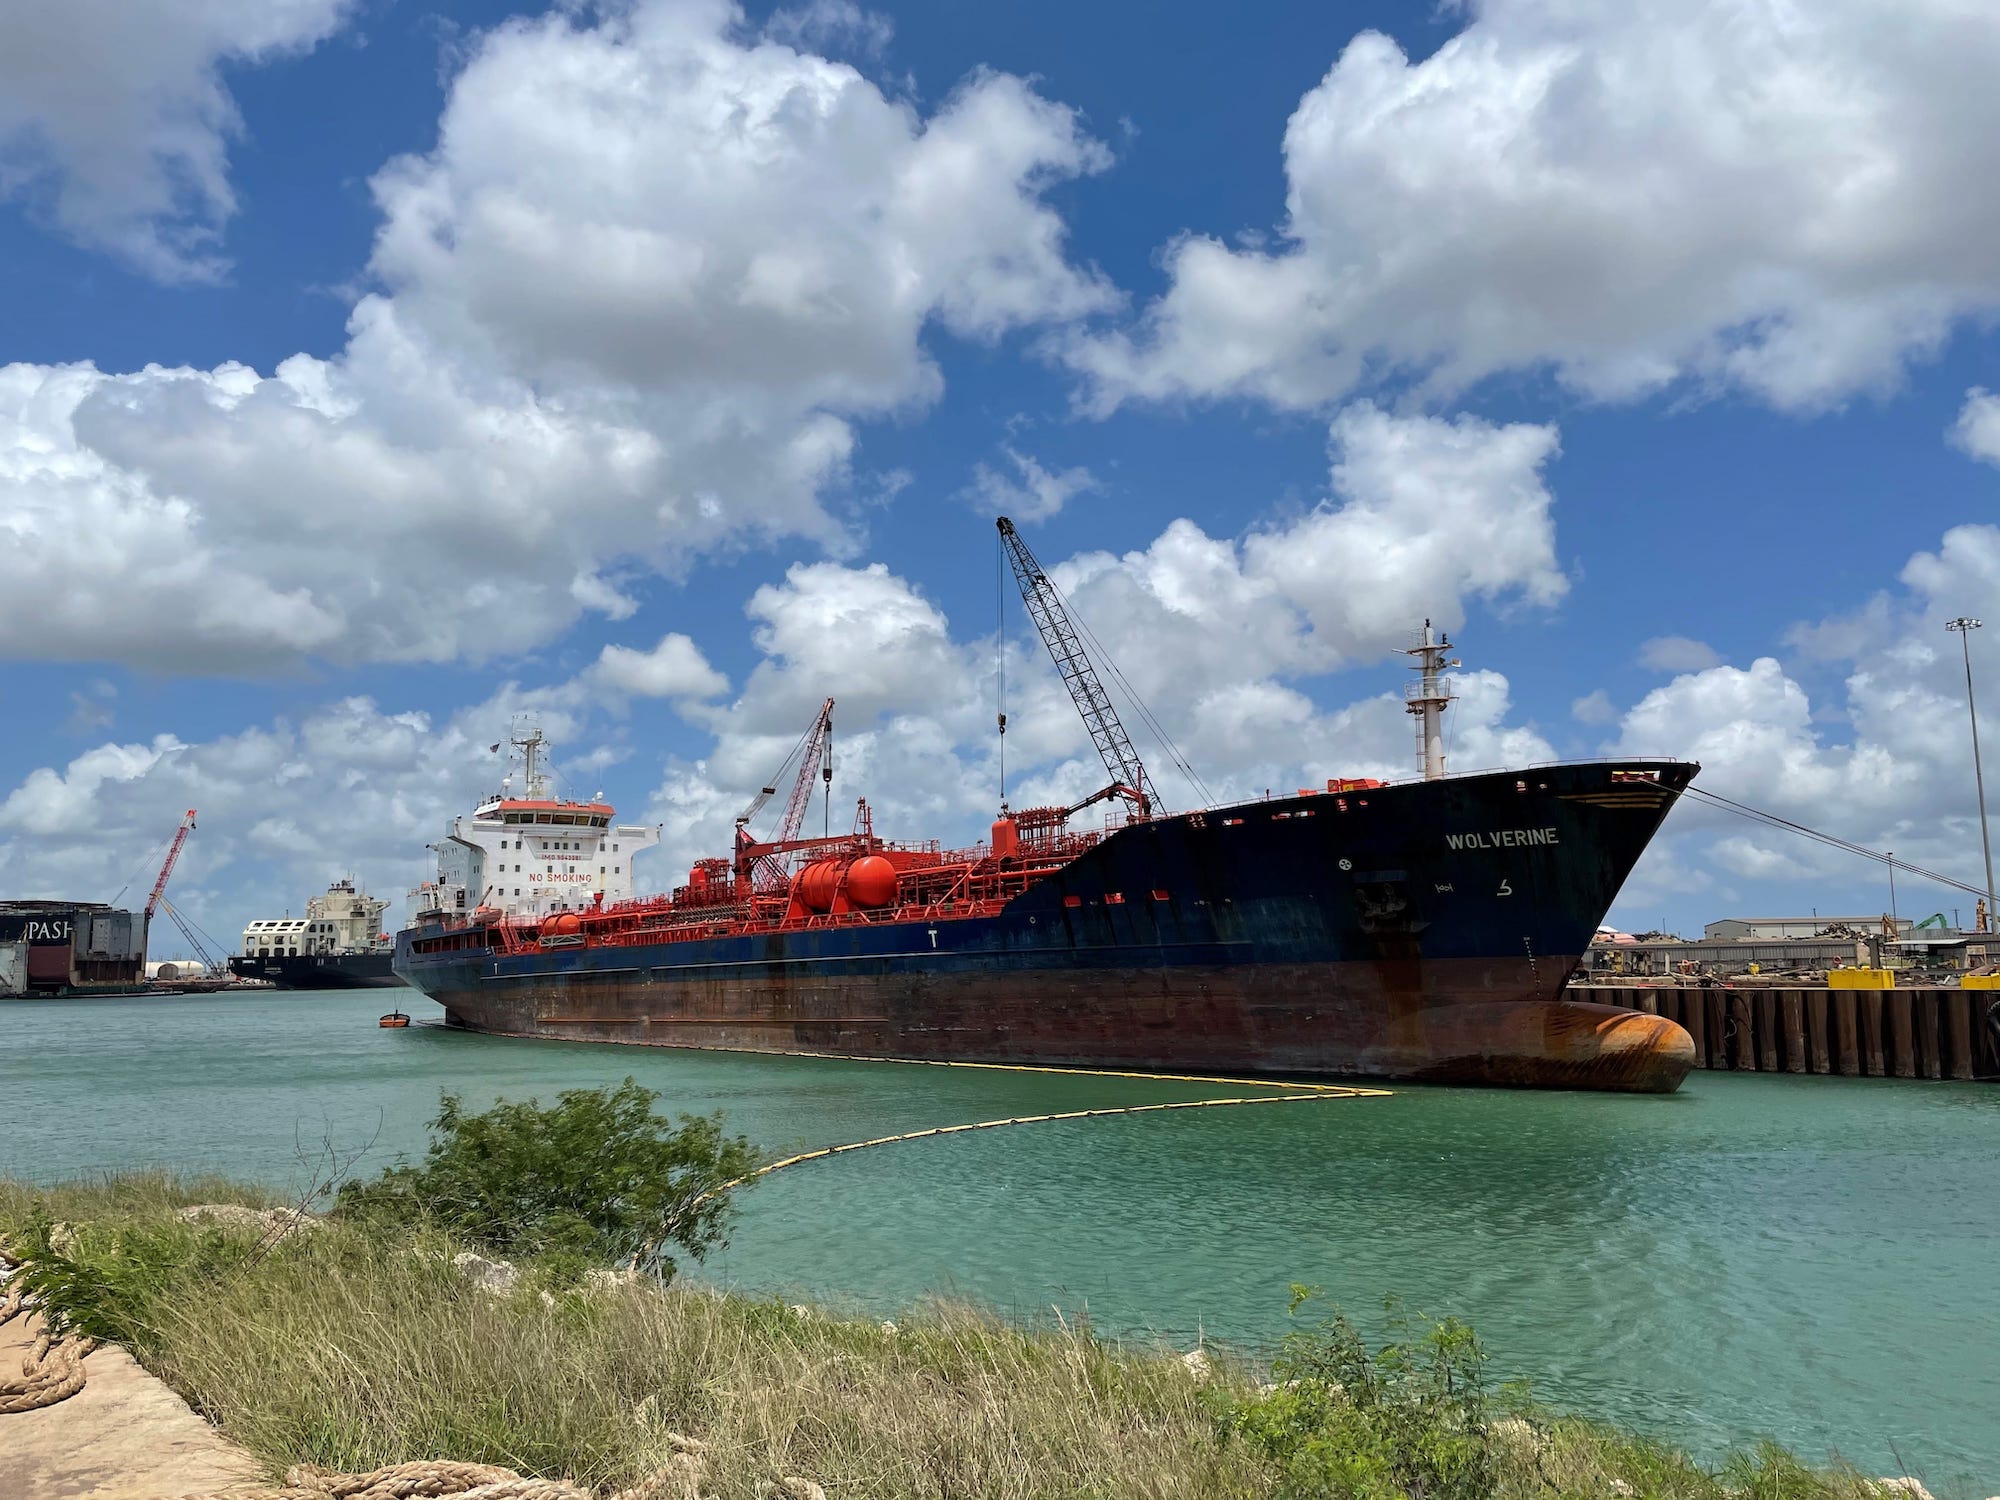 International Shipbreaking in Texas Completes First Project After EU Ship Recycling Approval